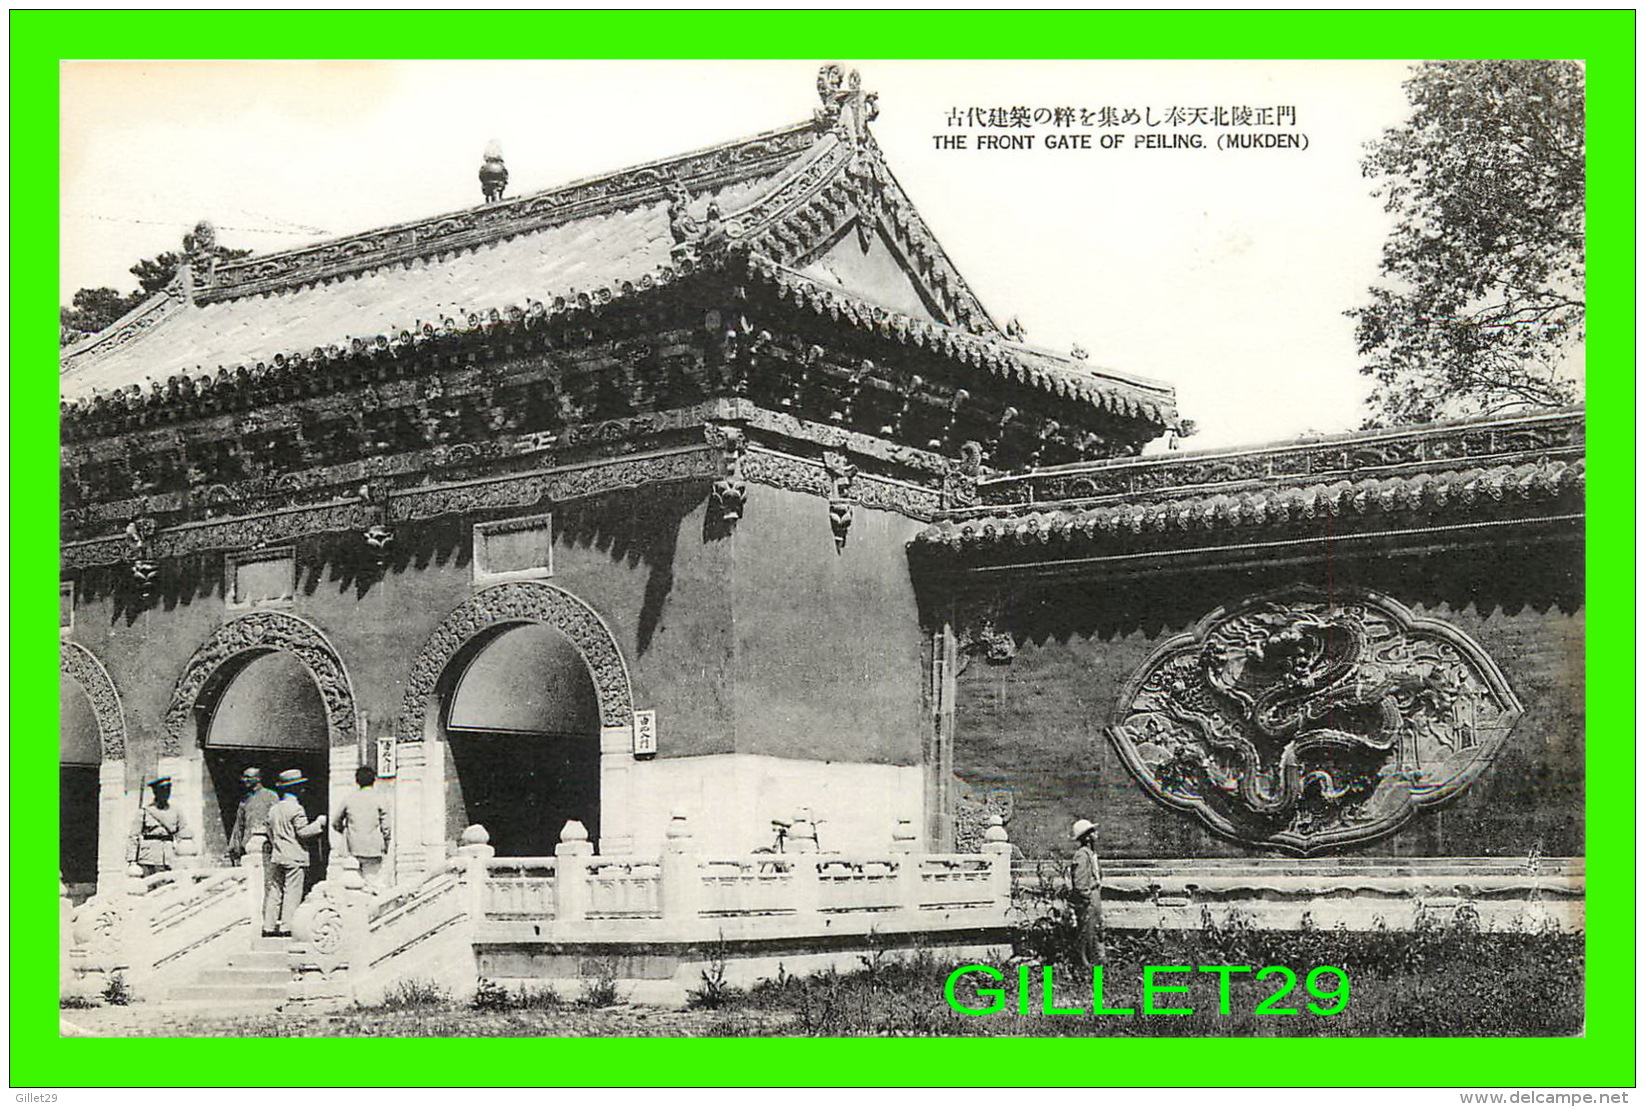 SHENYAND, LIANING, CHINE - THE FRONT GATE OF PEILING (MUKDEN) - ANIMATED - - Chine